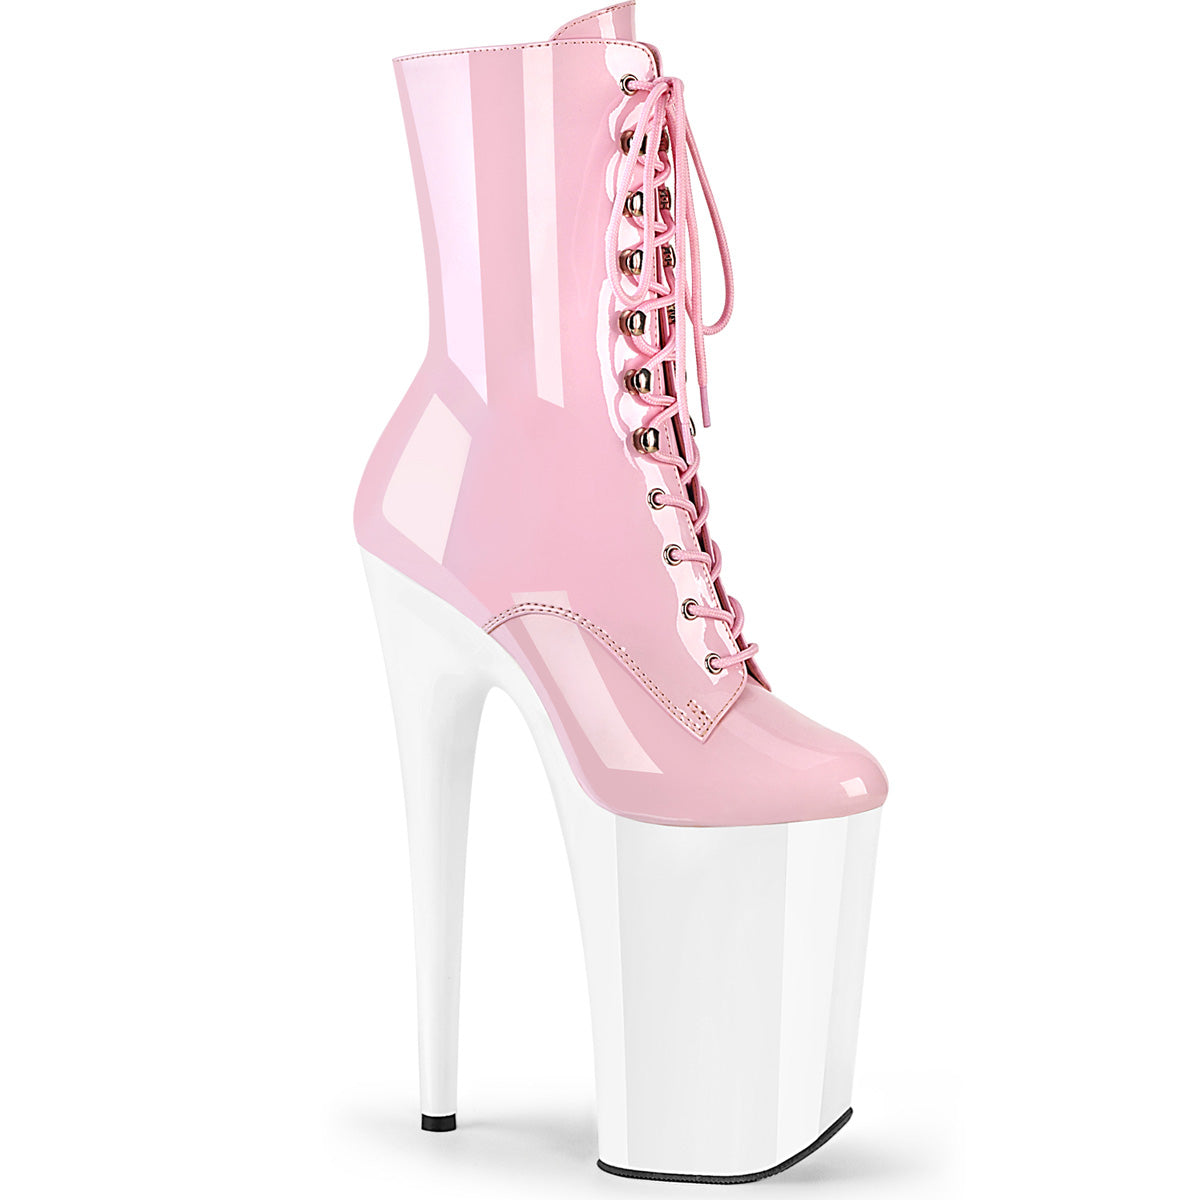 INFINITY-1020 Calf High Boots Pink Multi view 1